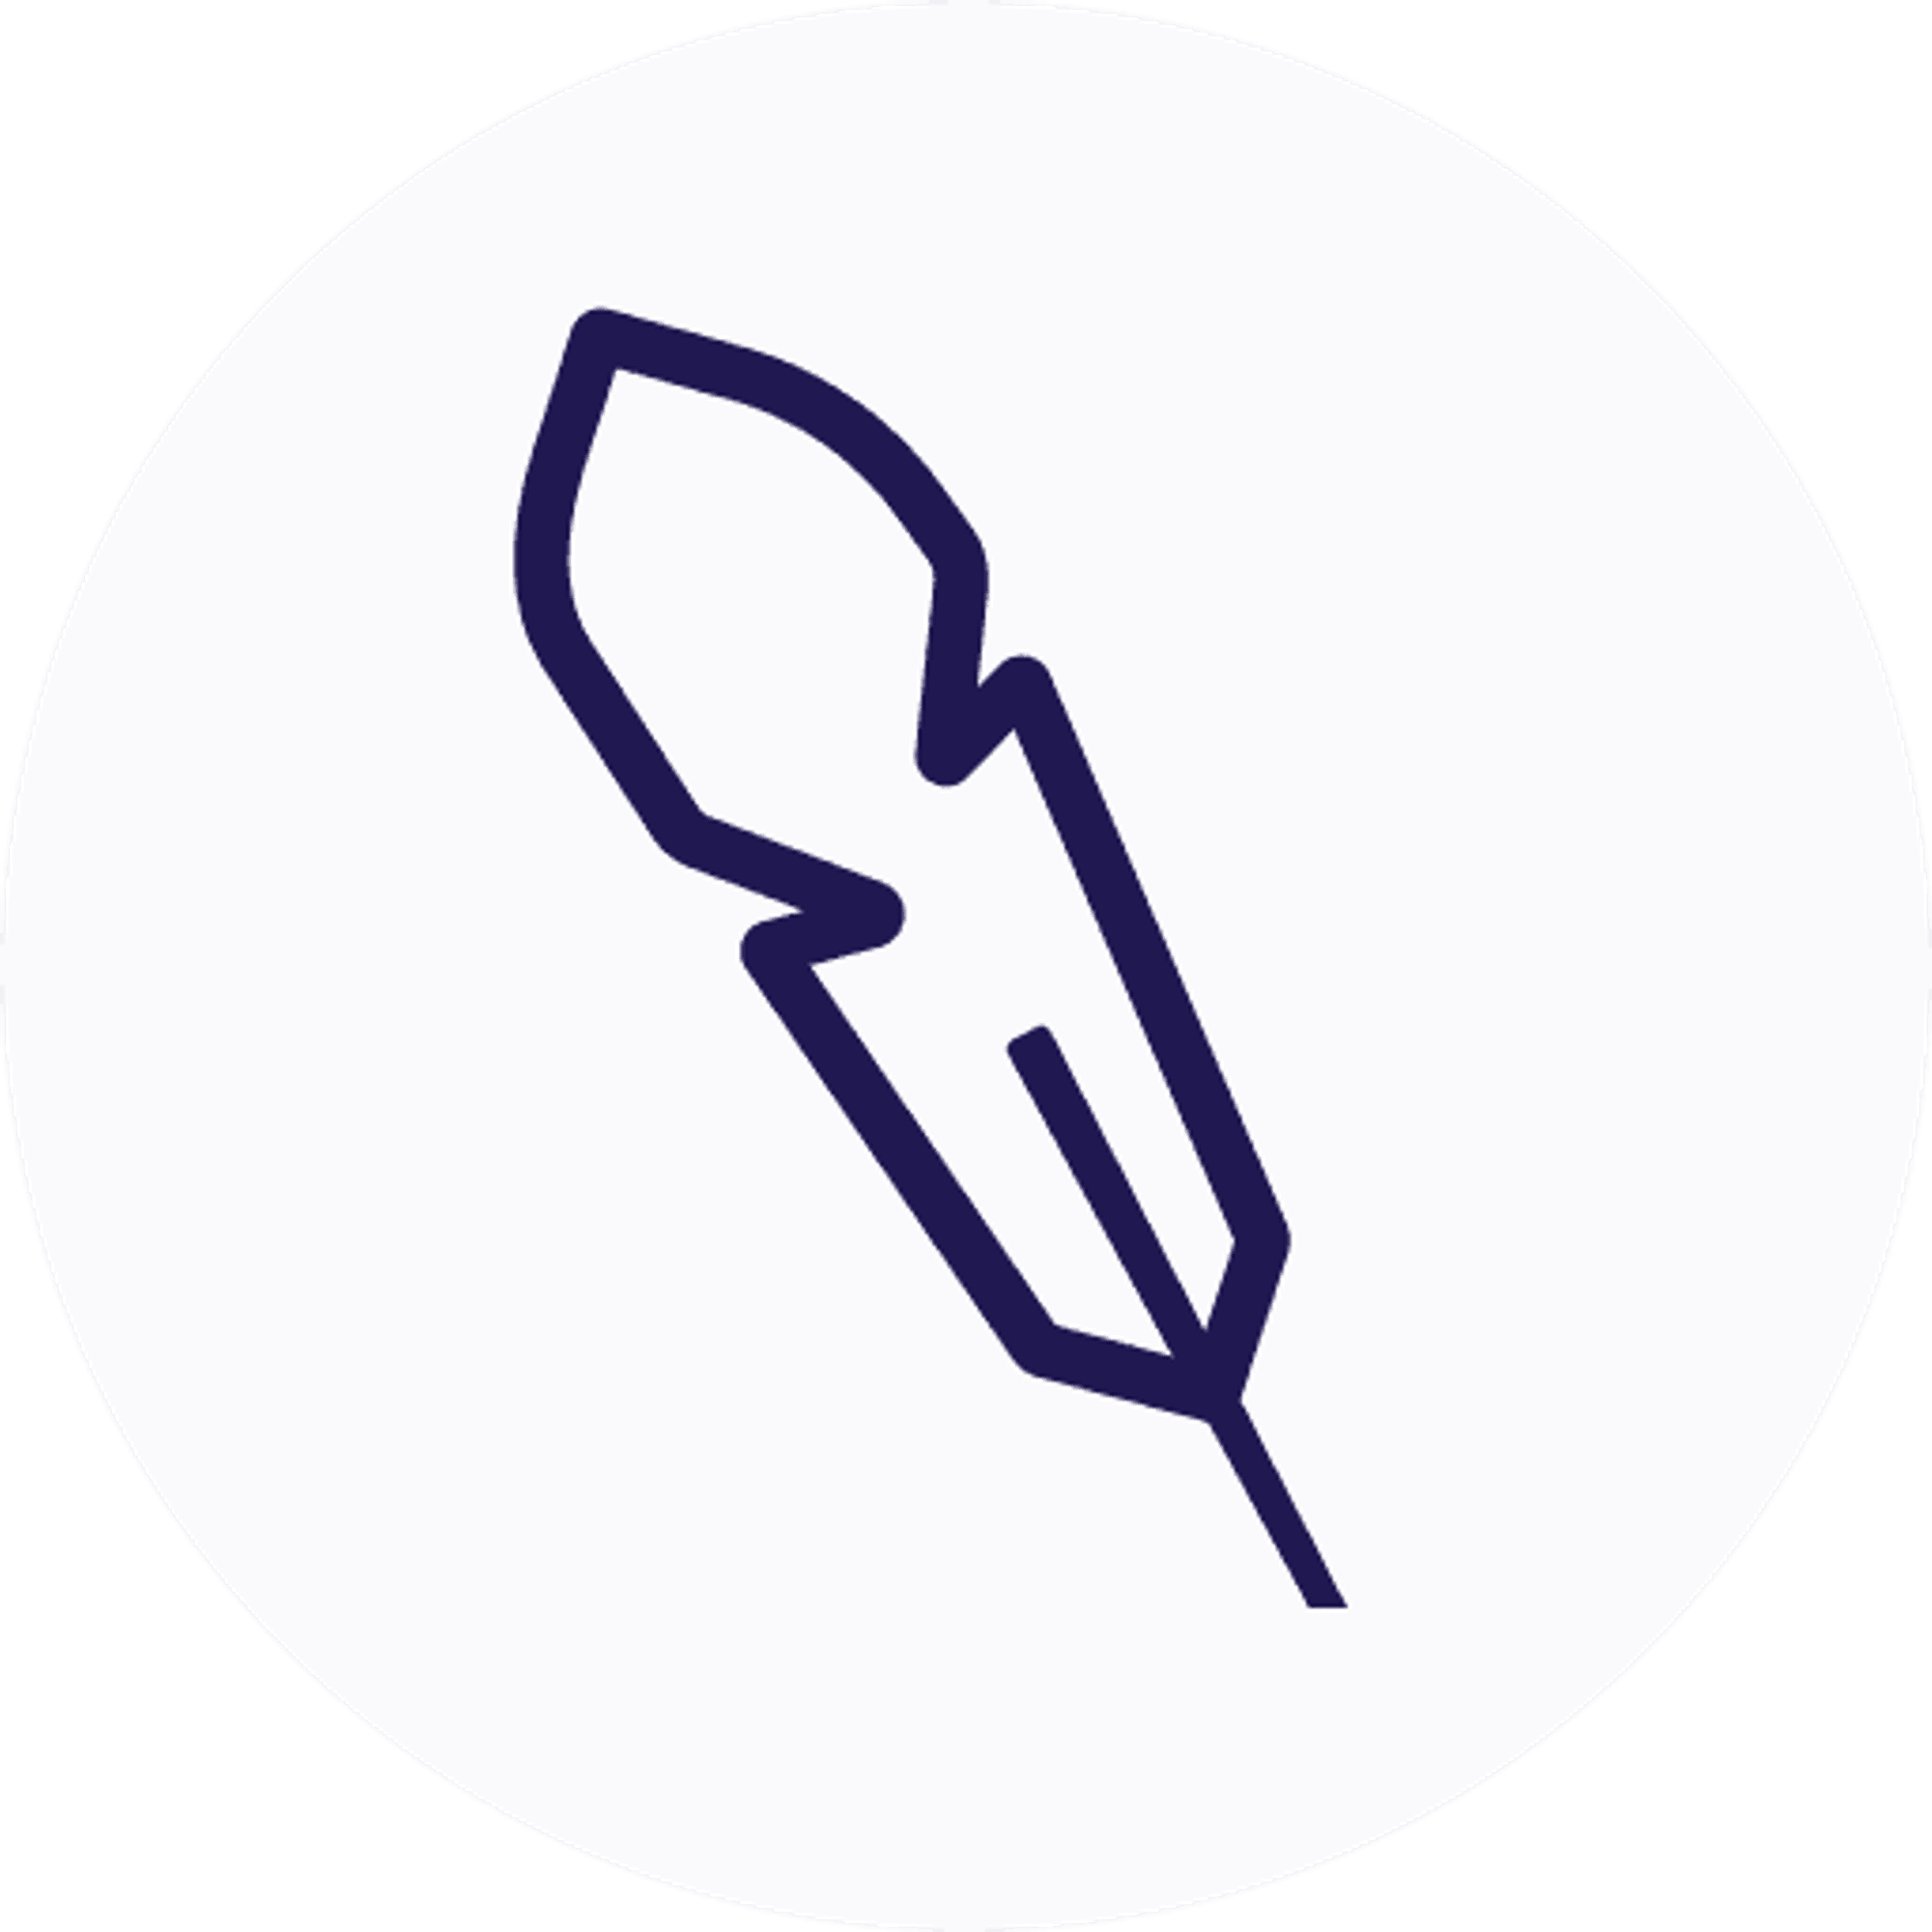 Jenni | The AI For Writing Essays, Research Papers & More!